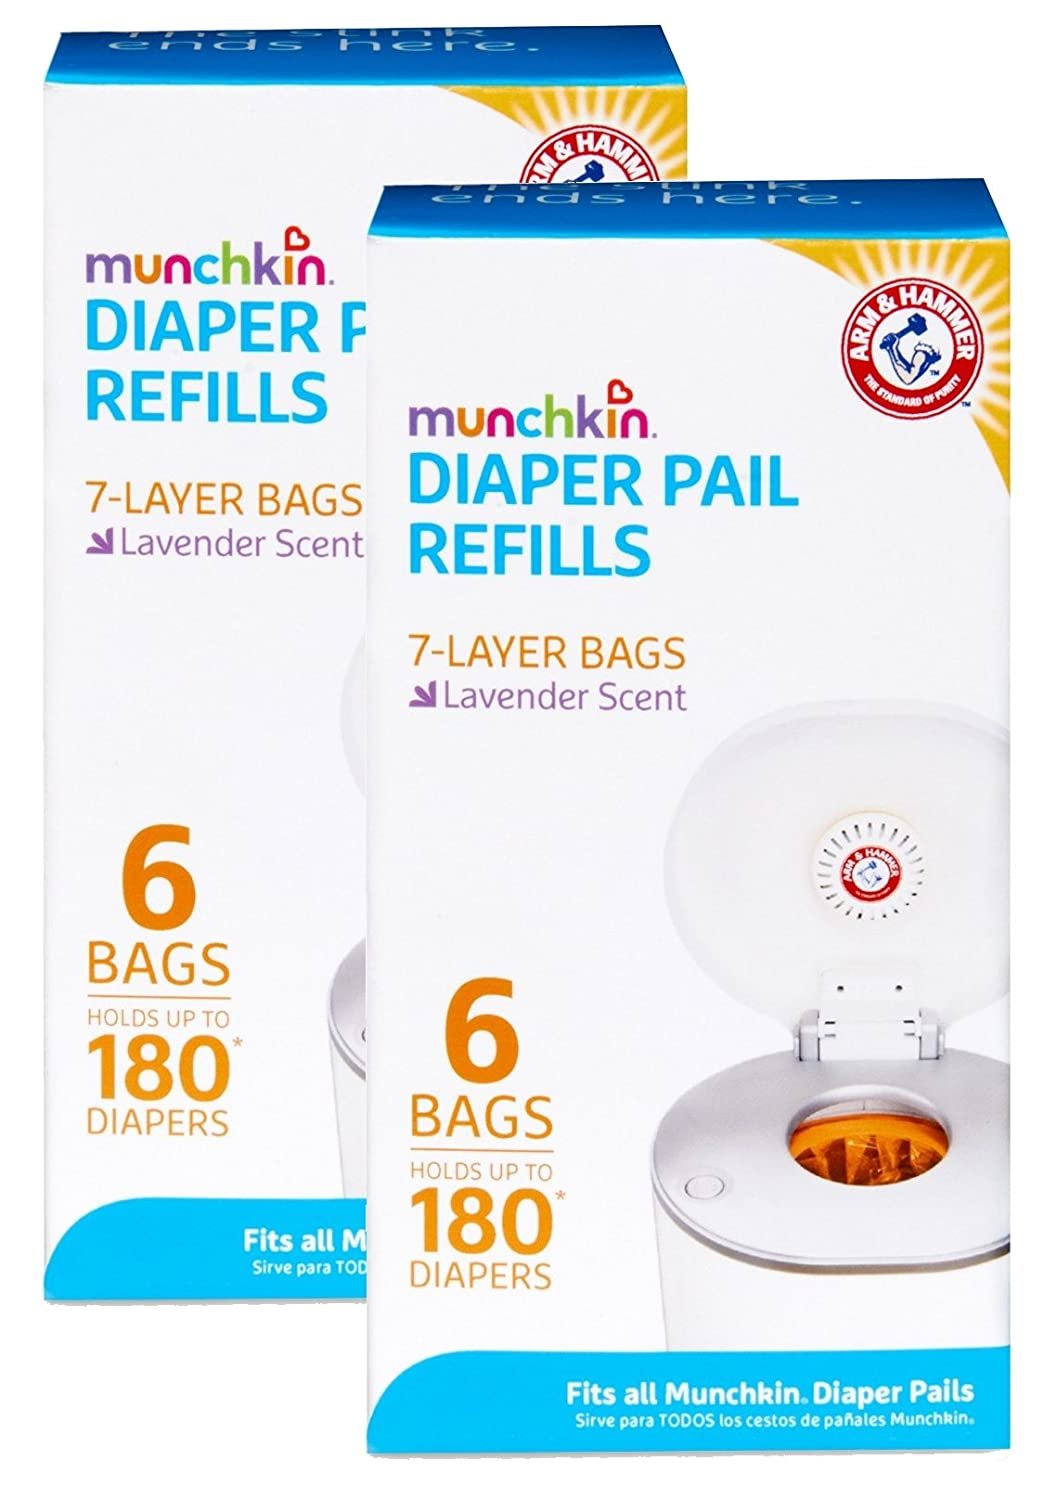 Munchkin Arm & Hammer Diaper Pail Snap with Seal and Toss Refill Bags, 12 Count